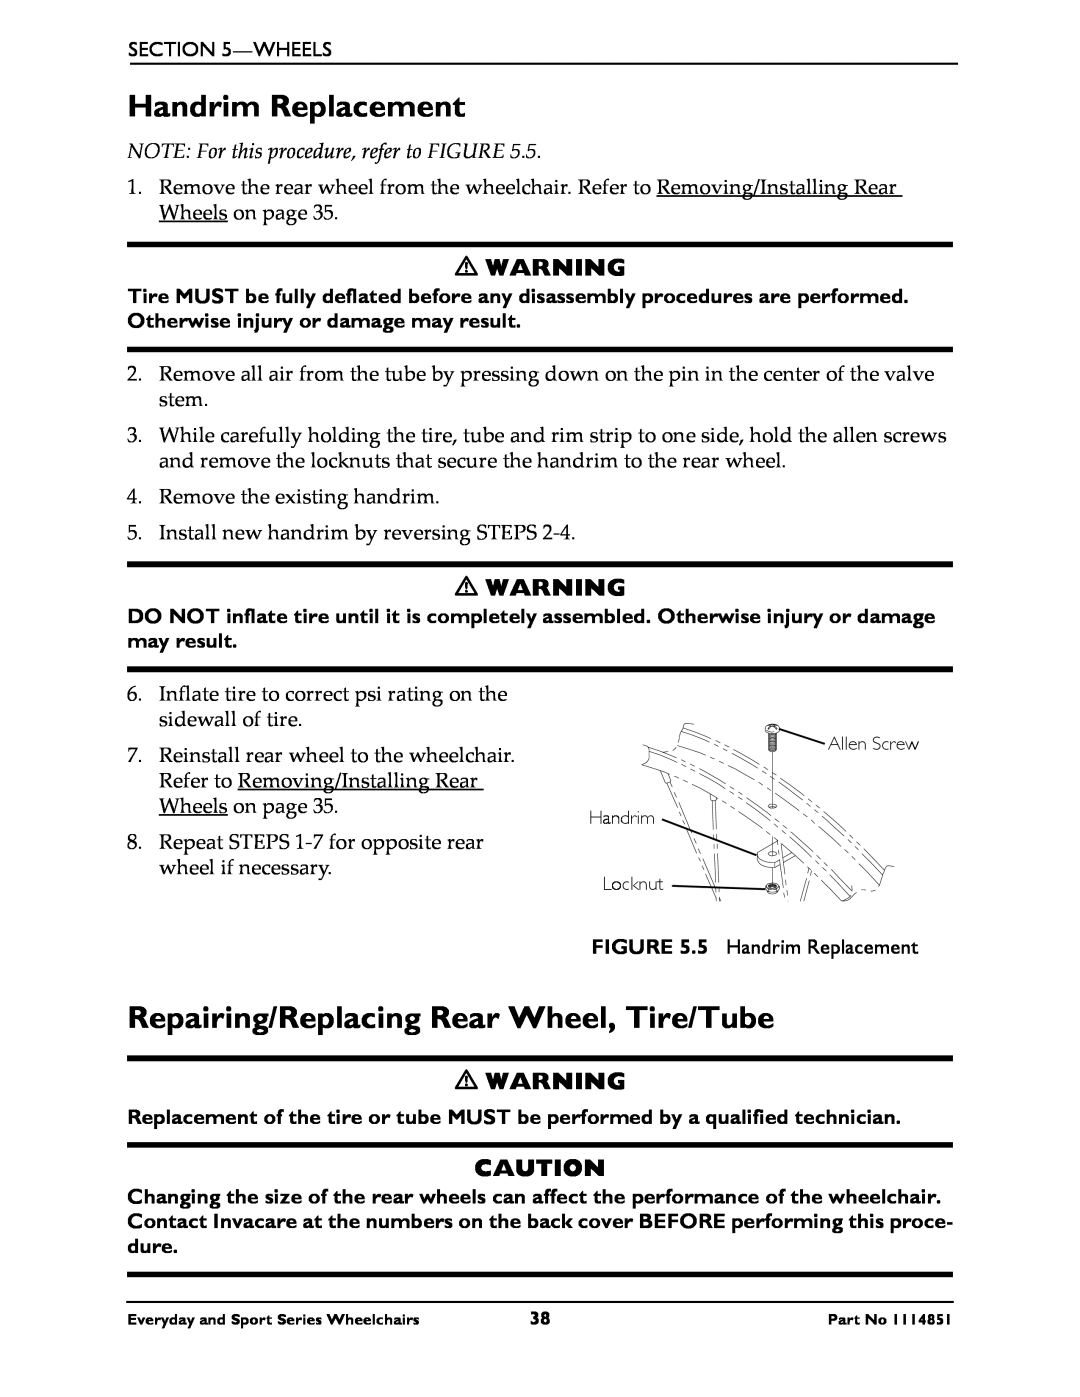 Invacare 1114851 Handrim Replacement, Repairing/Replacing Rear Wheel, Tire/Tube, NOTE For this procedure, refer to FIGURE 